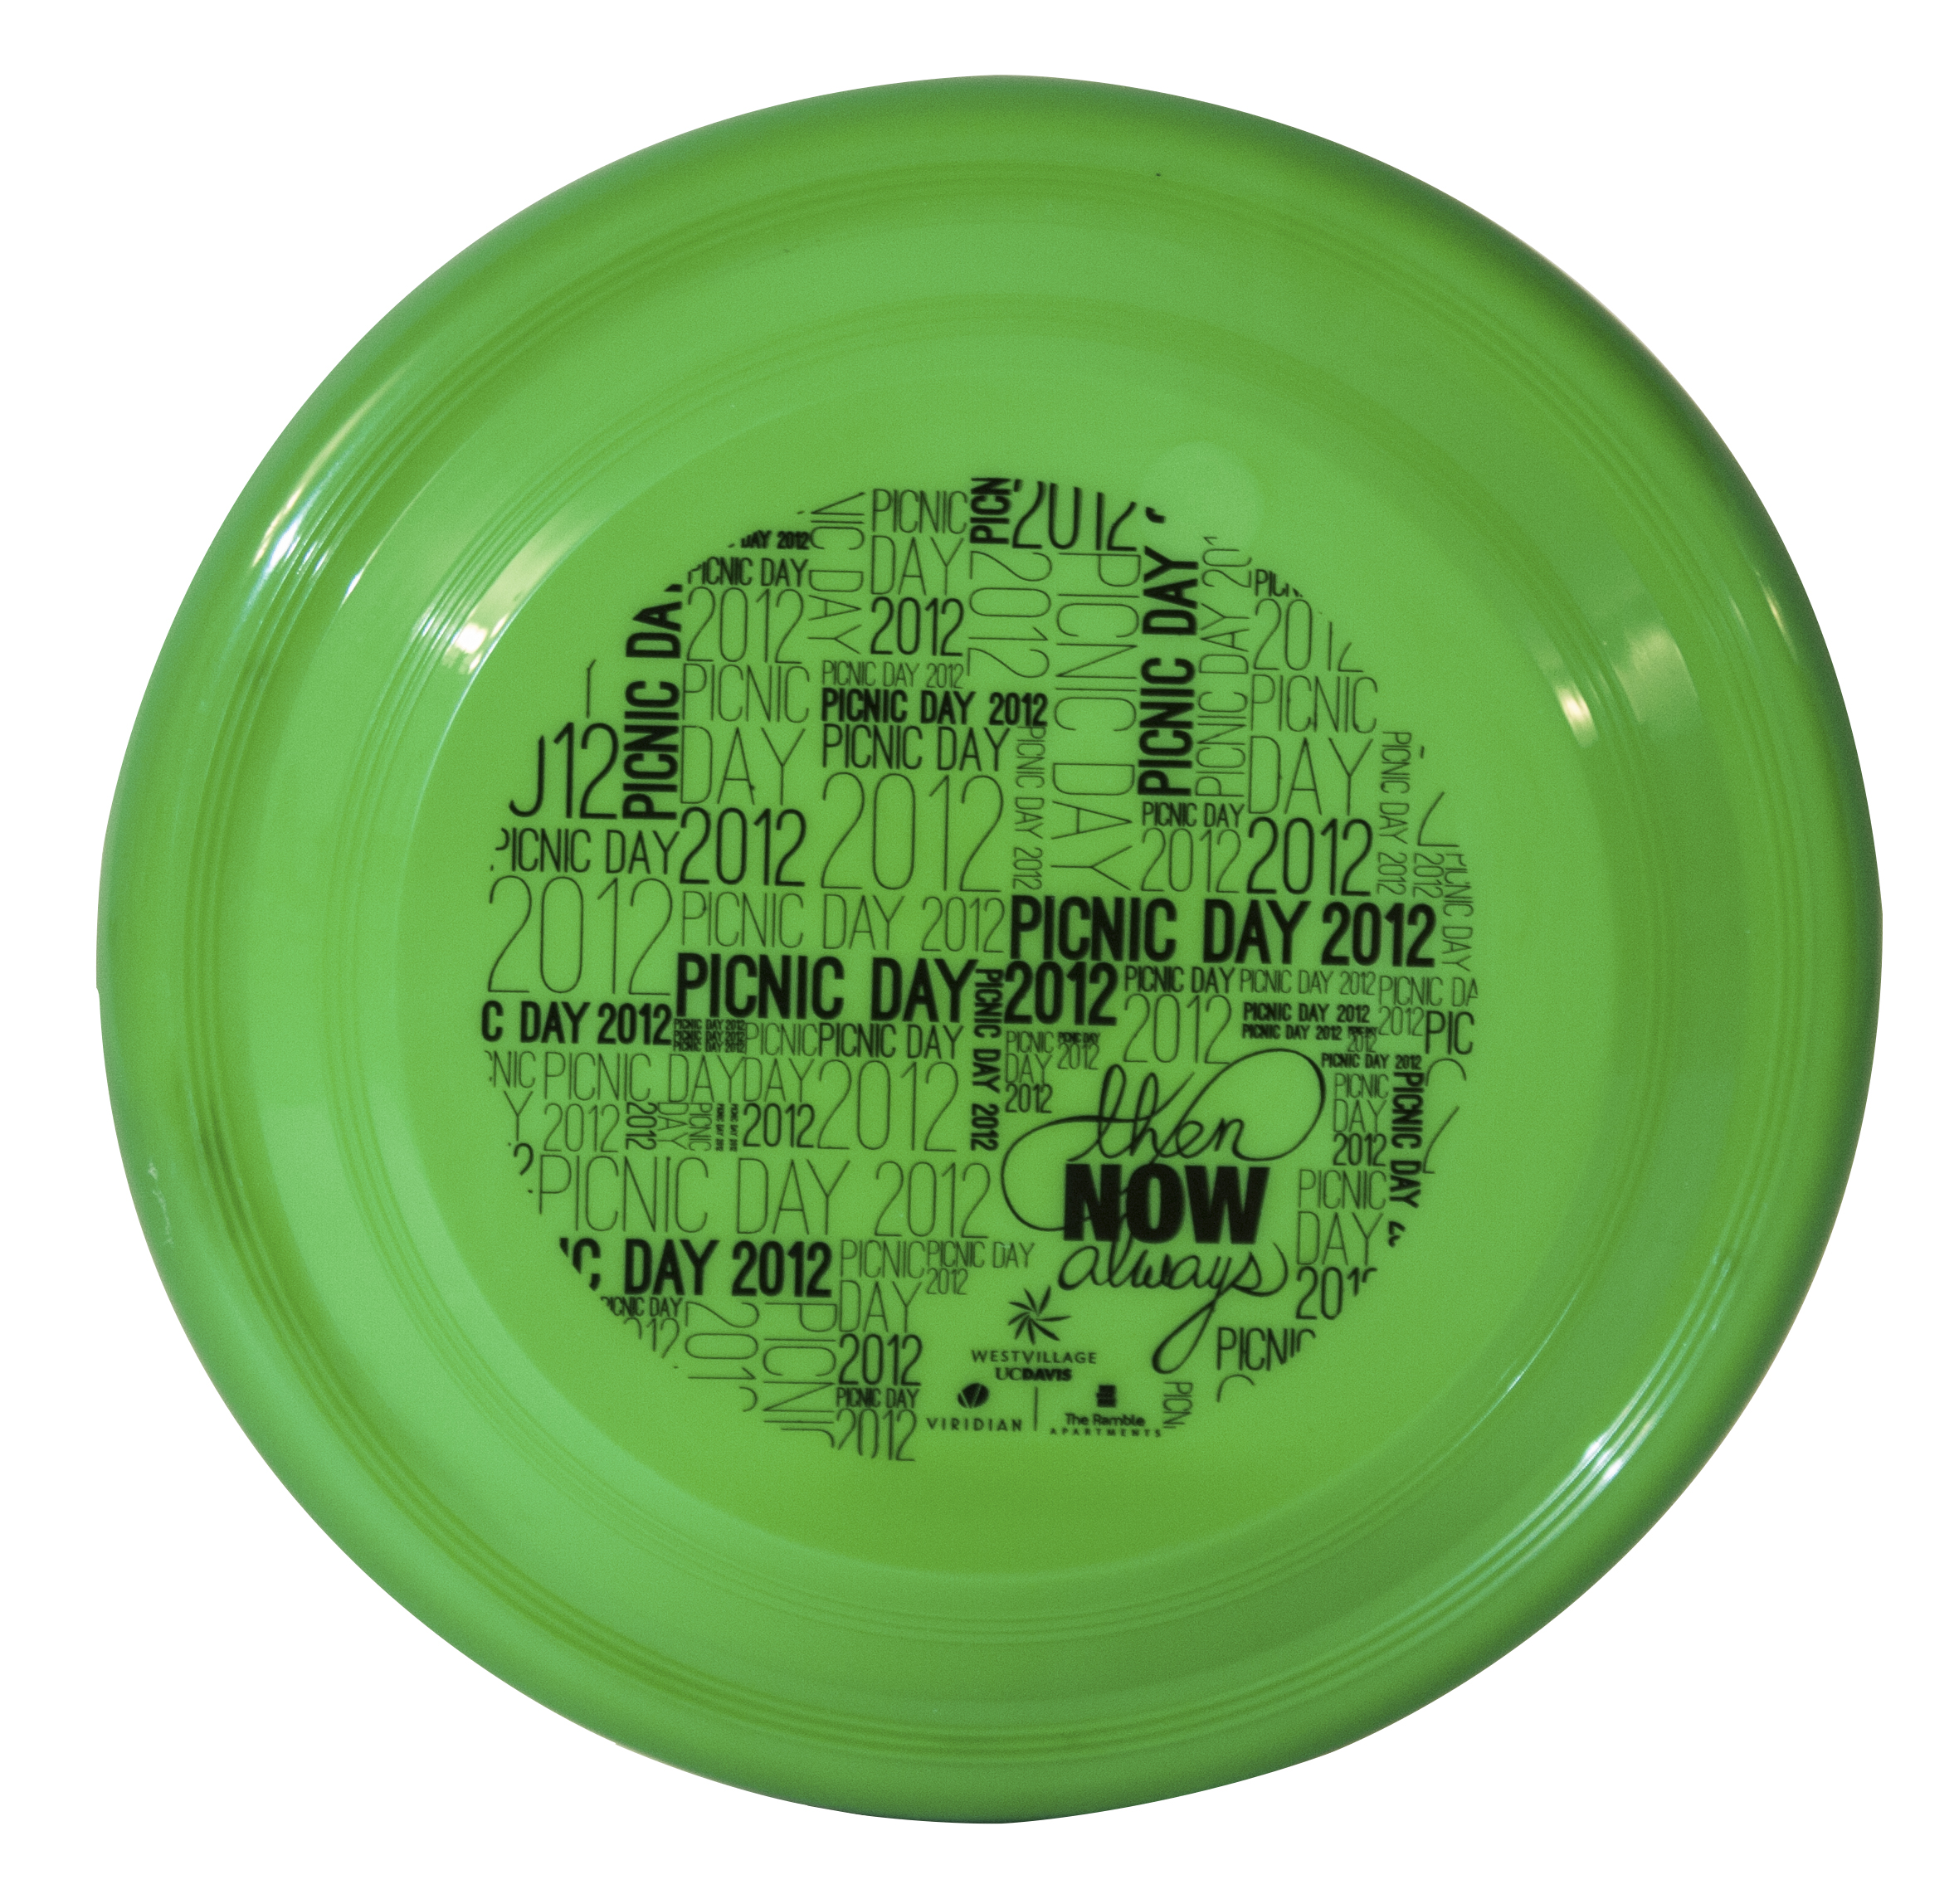 Picnic Day promotional Frisbee